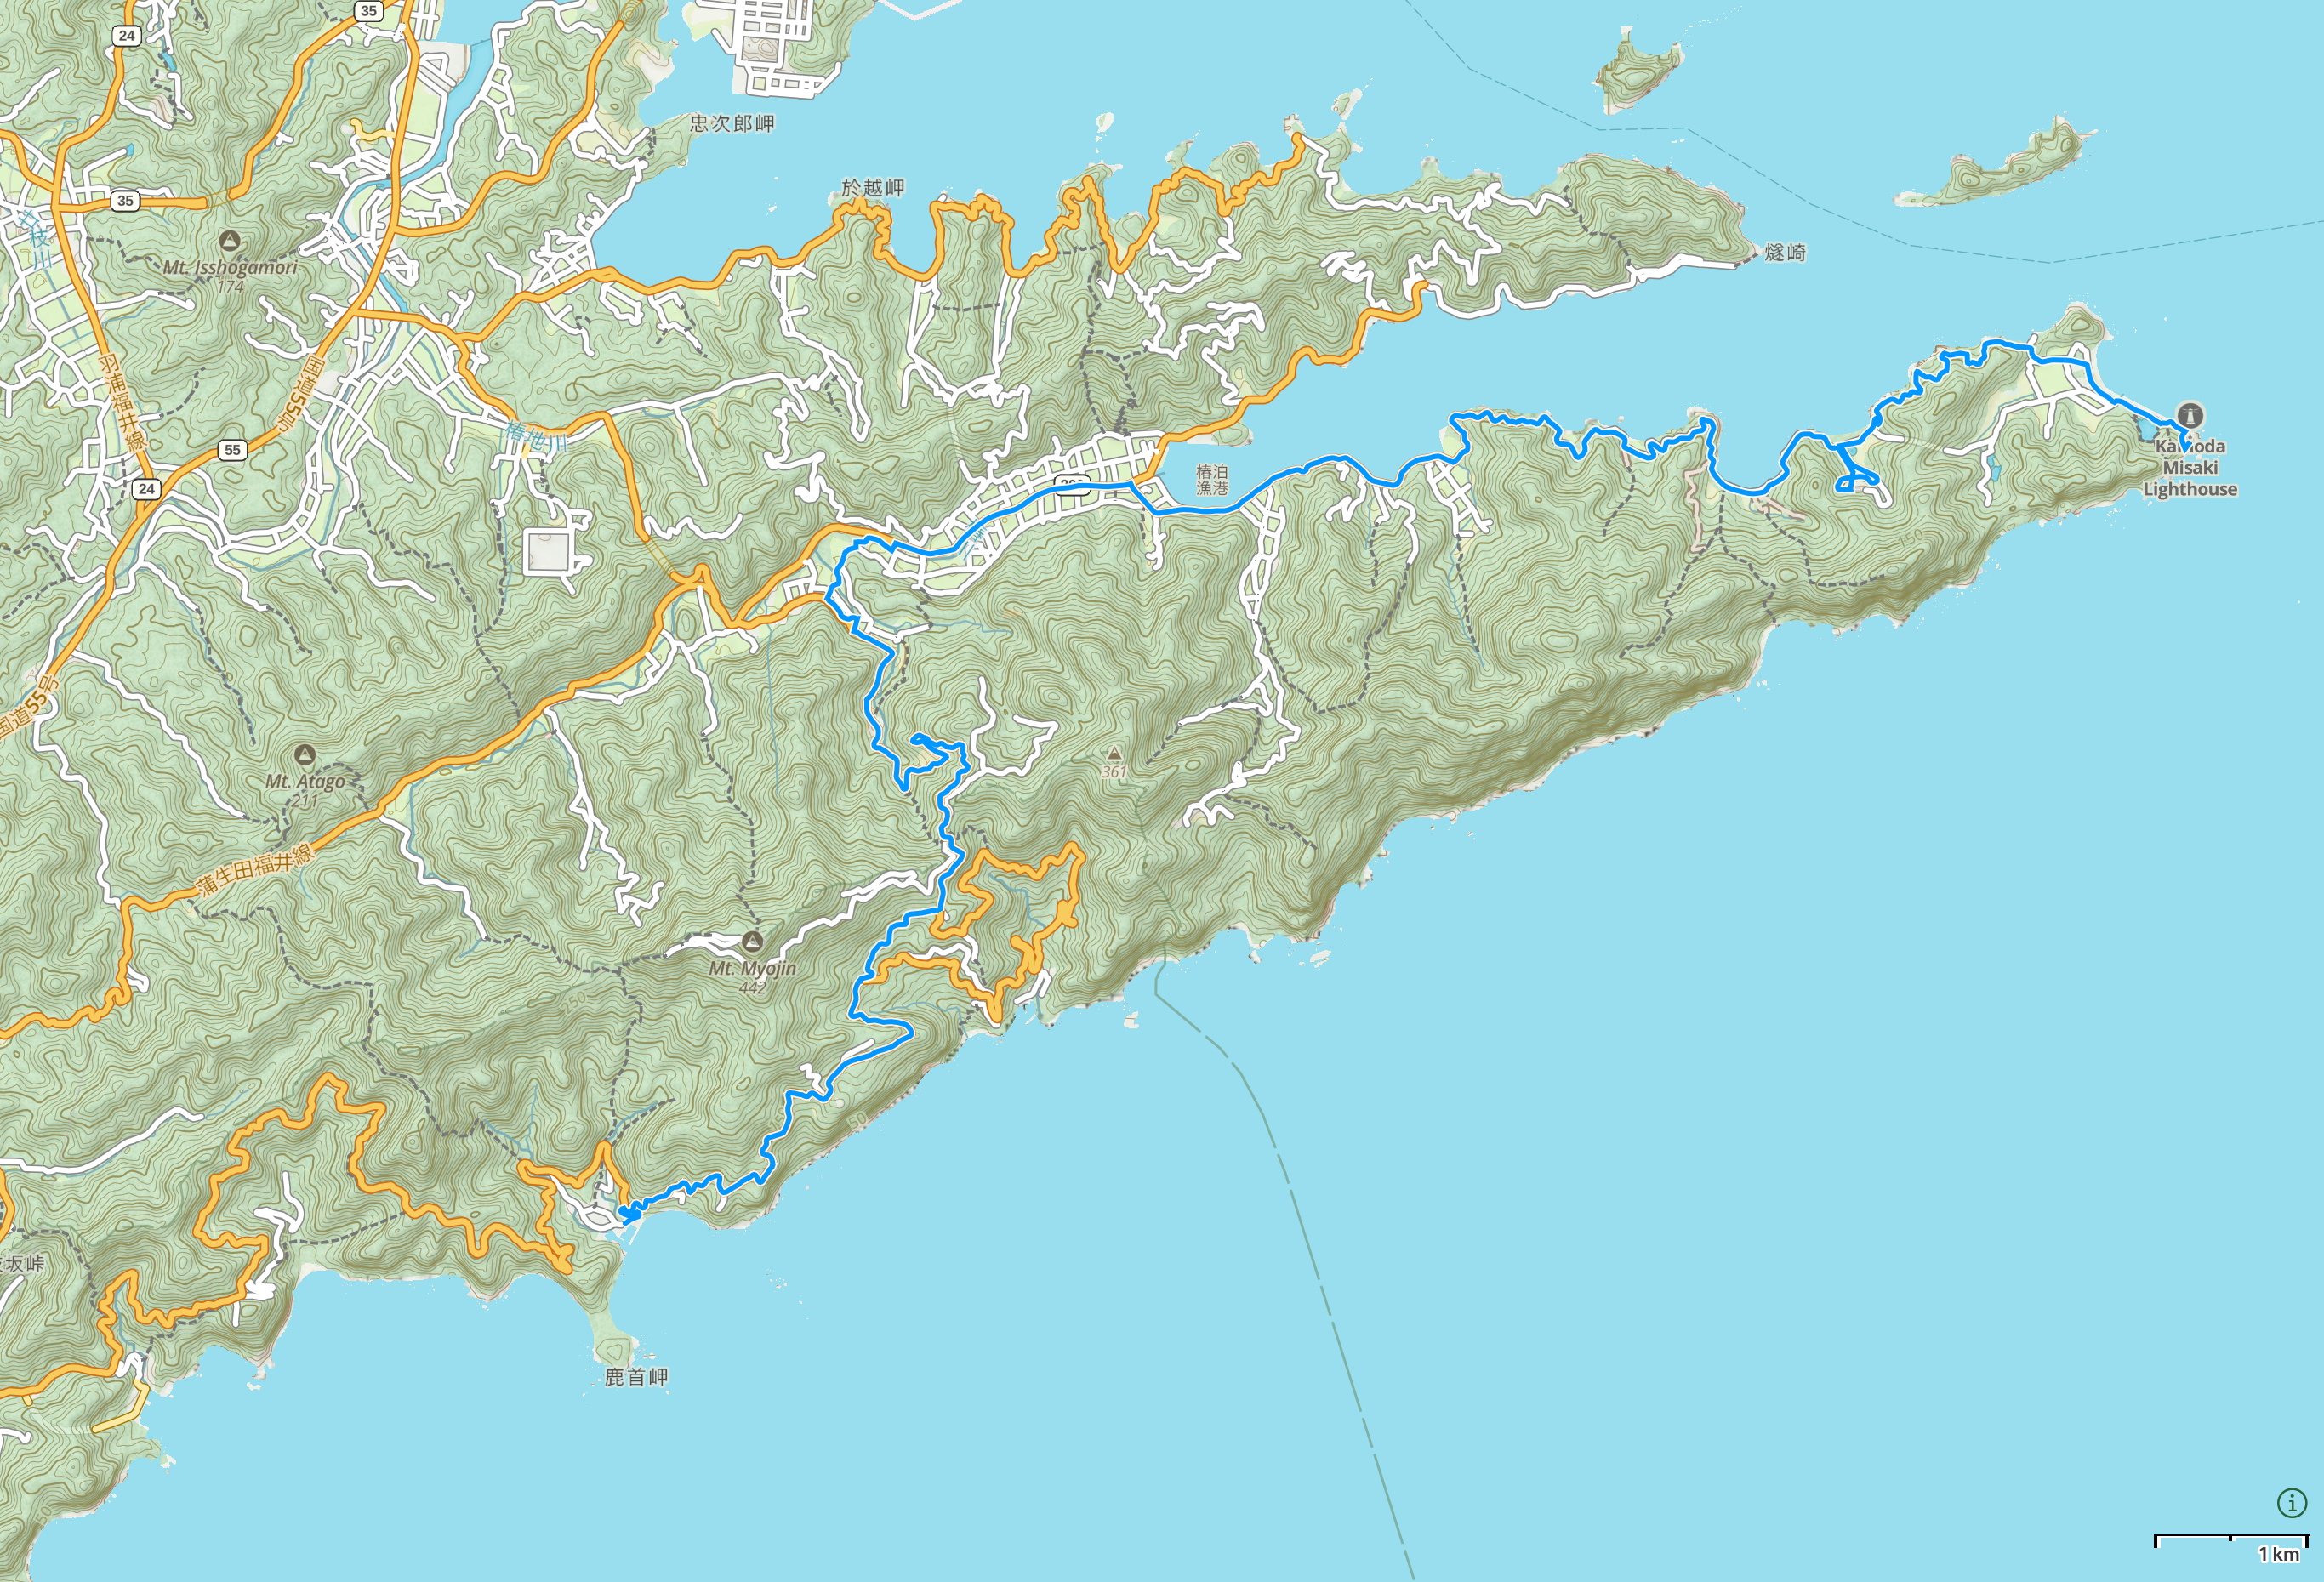 Map of Tokushima Prefecture with author’s route between Cape Gamōda and Abu highlighted.